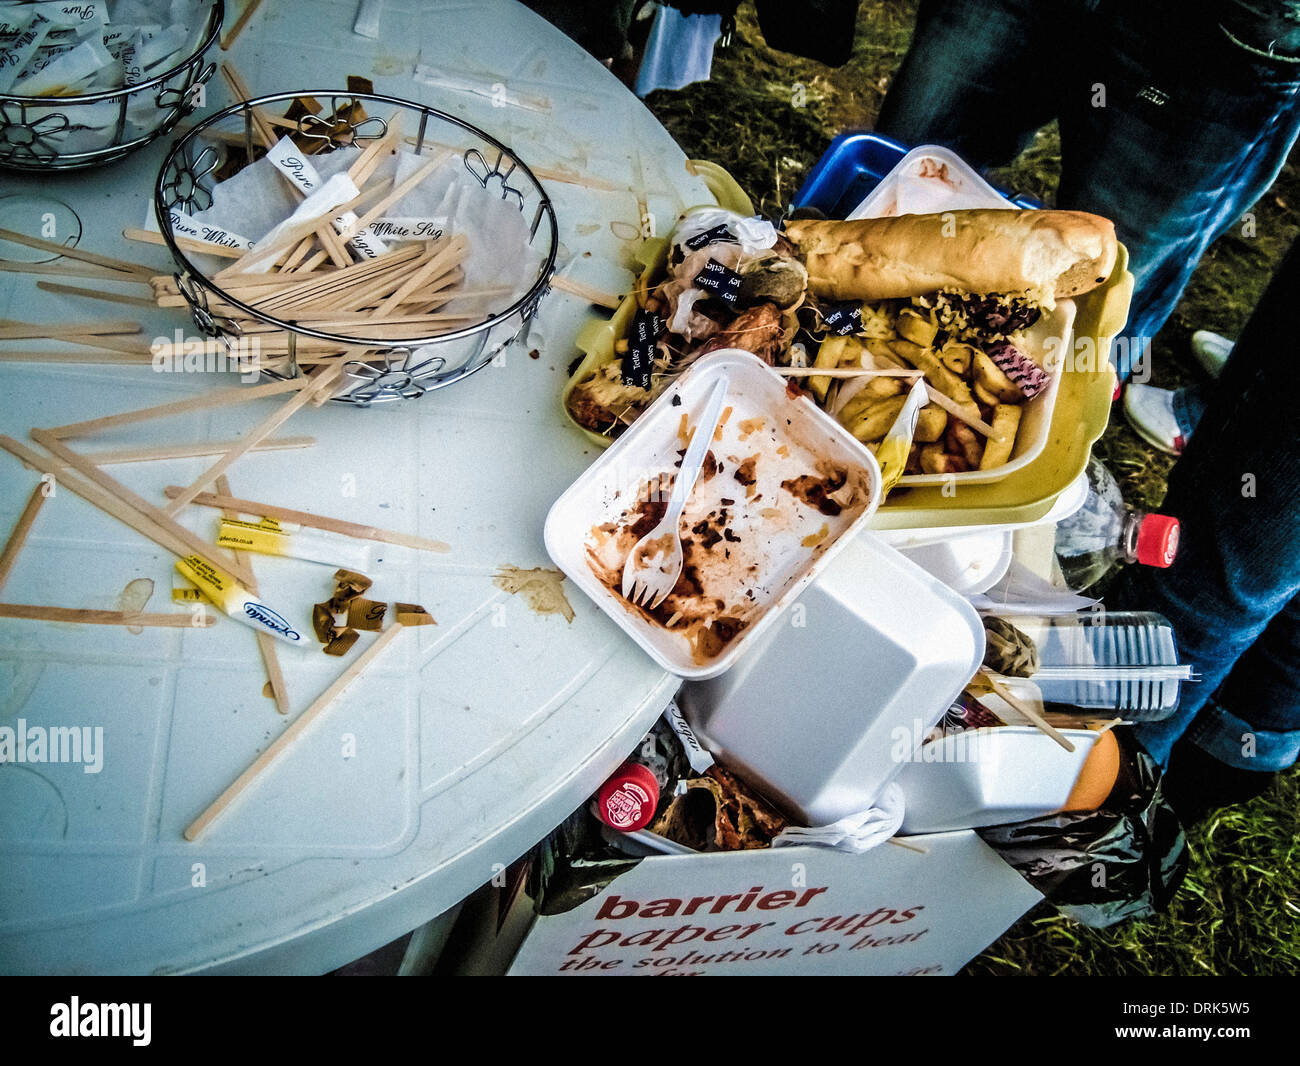 Discarded fast food leftovers at an outdoor event. Stock Photo